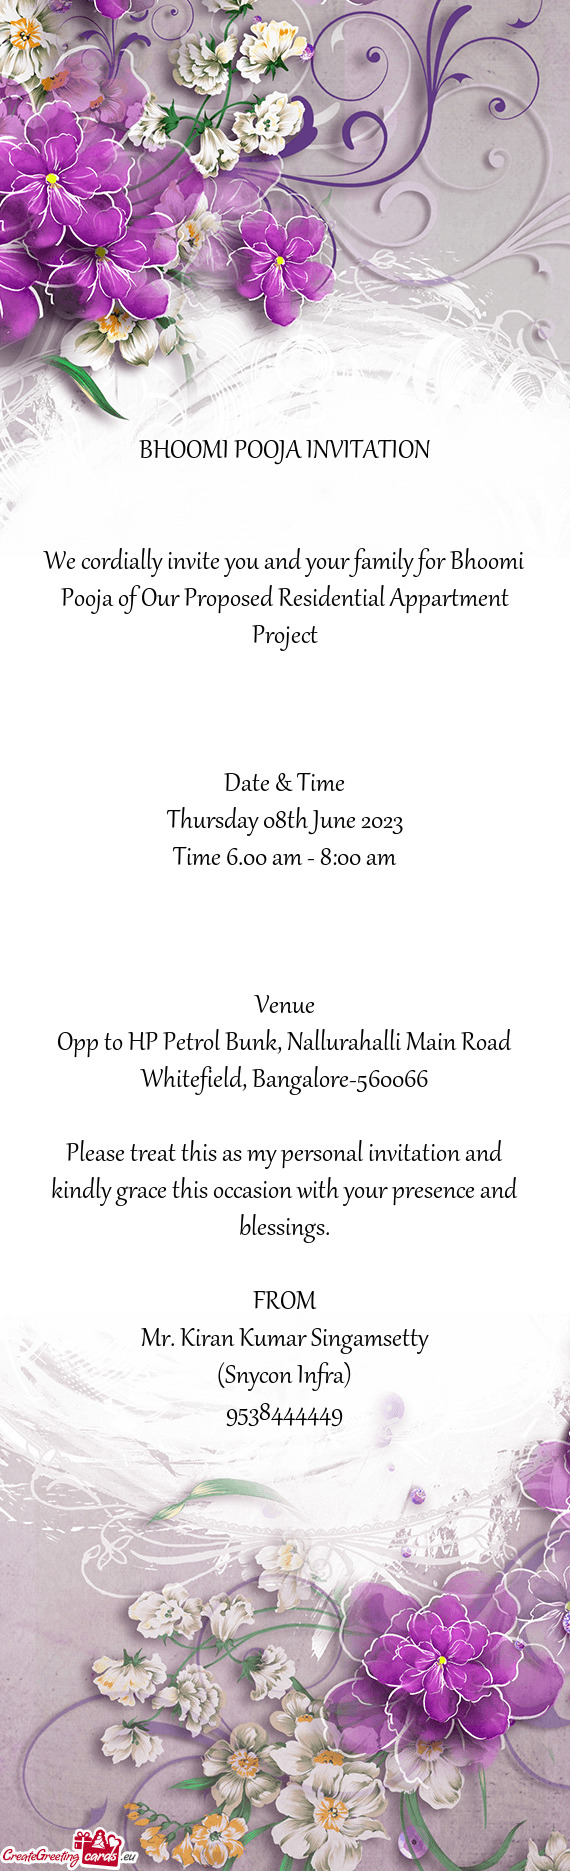 We cordially invite you and your family for Bhoomi Pooja of Our Proposed Residential Appartment Proj